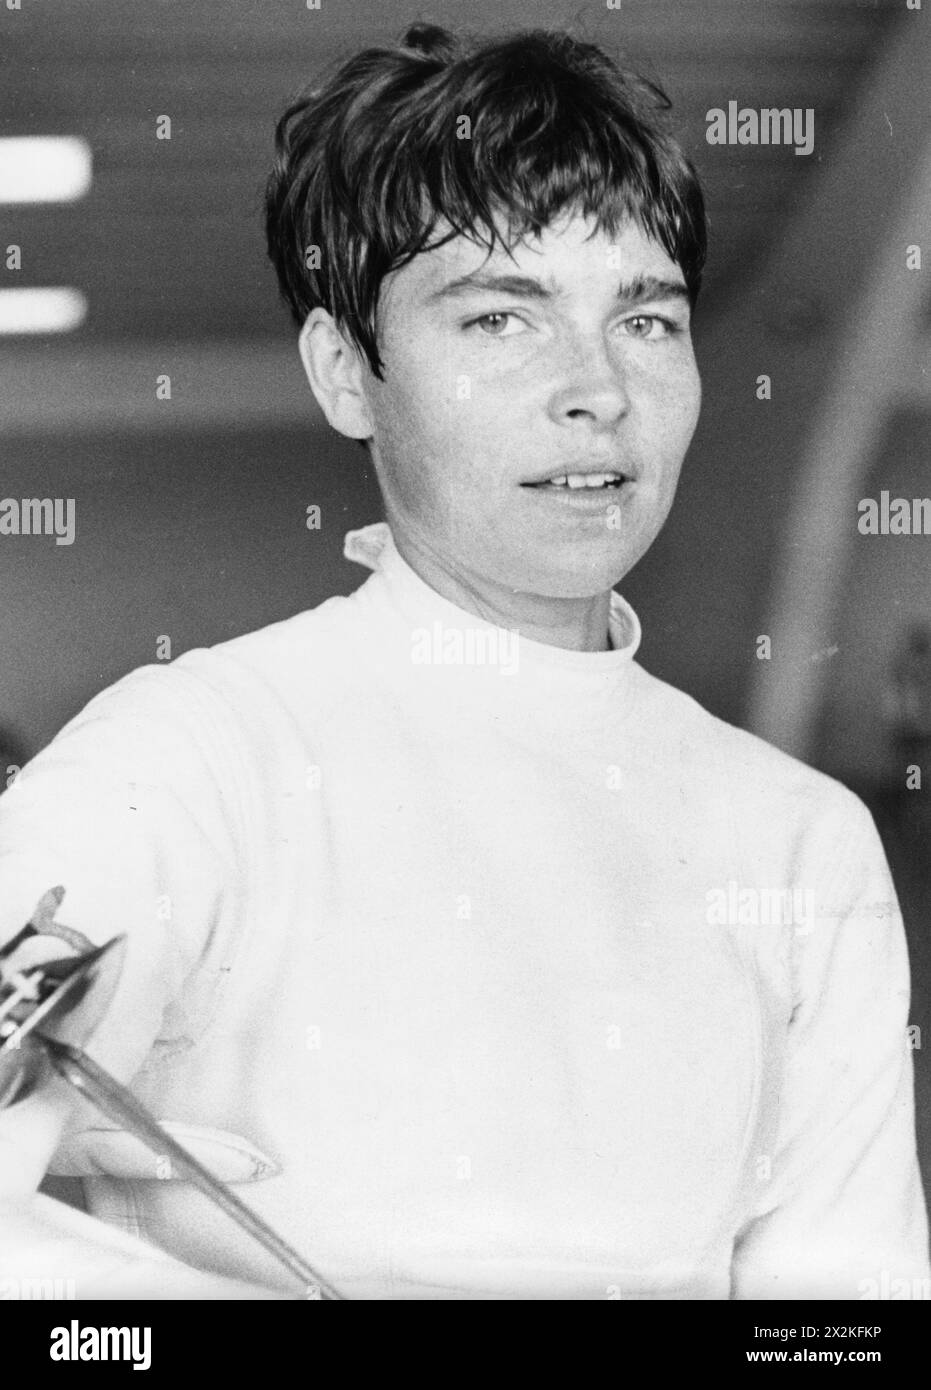 Schmid, Adelaide 'Heidi', *5.12.1938, German fencer, during the Olympic Games in Mexico City, ADDITIONAL-RIGHTS-CLEARANCE-INFO-NOT-AVAILABLE Stock Photo